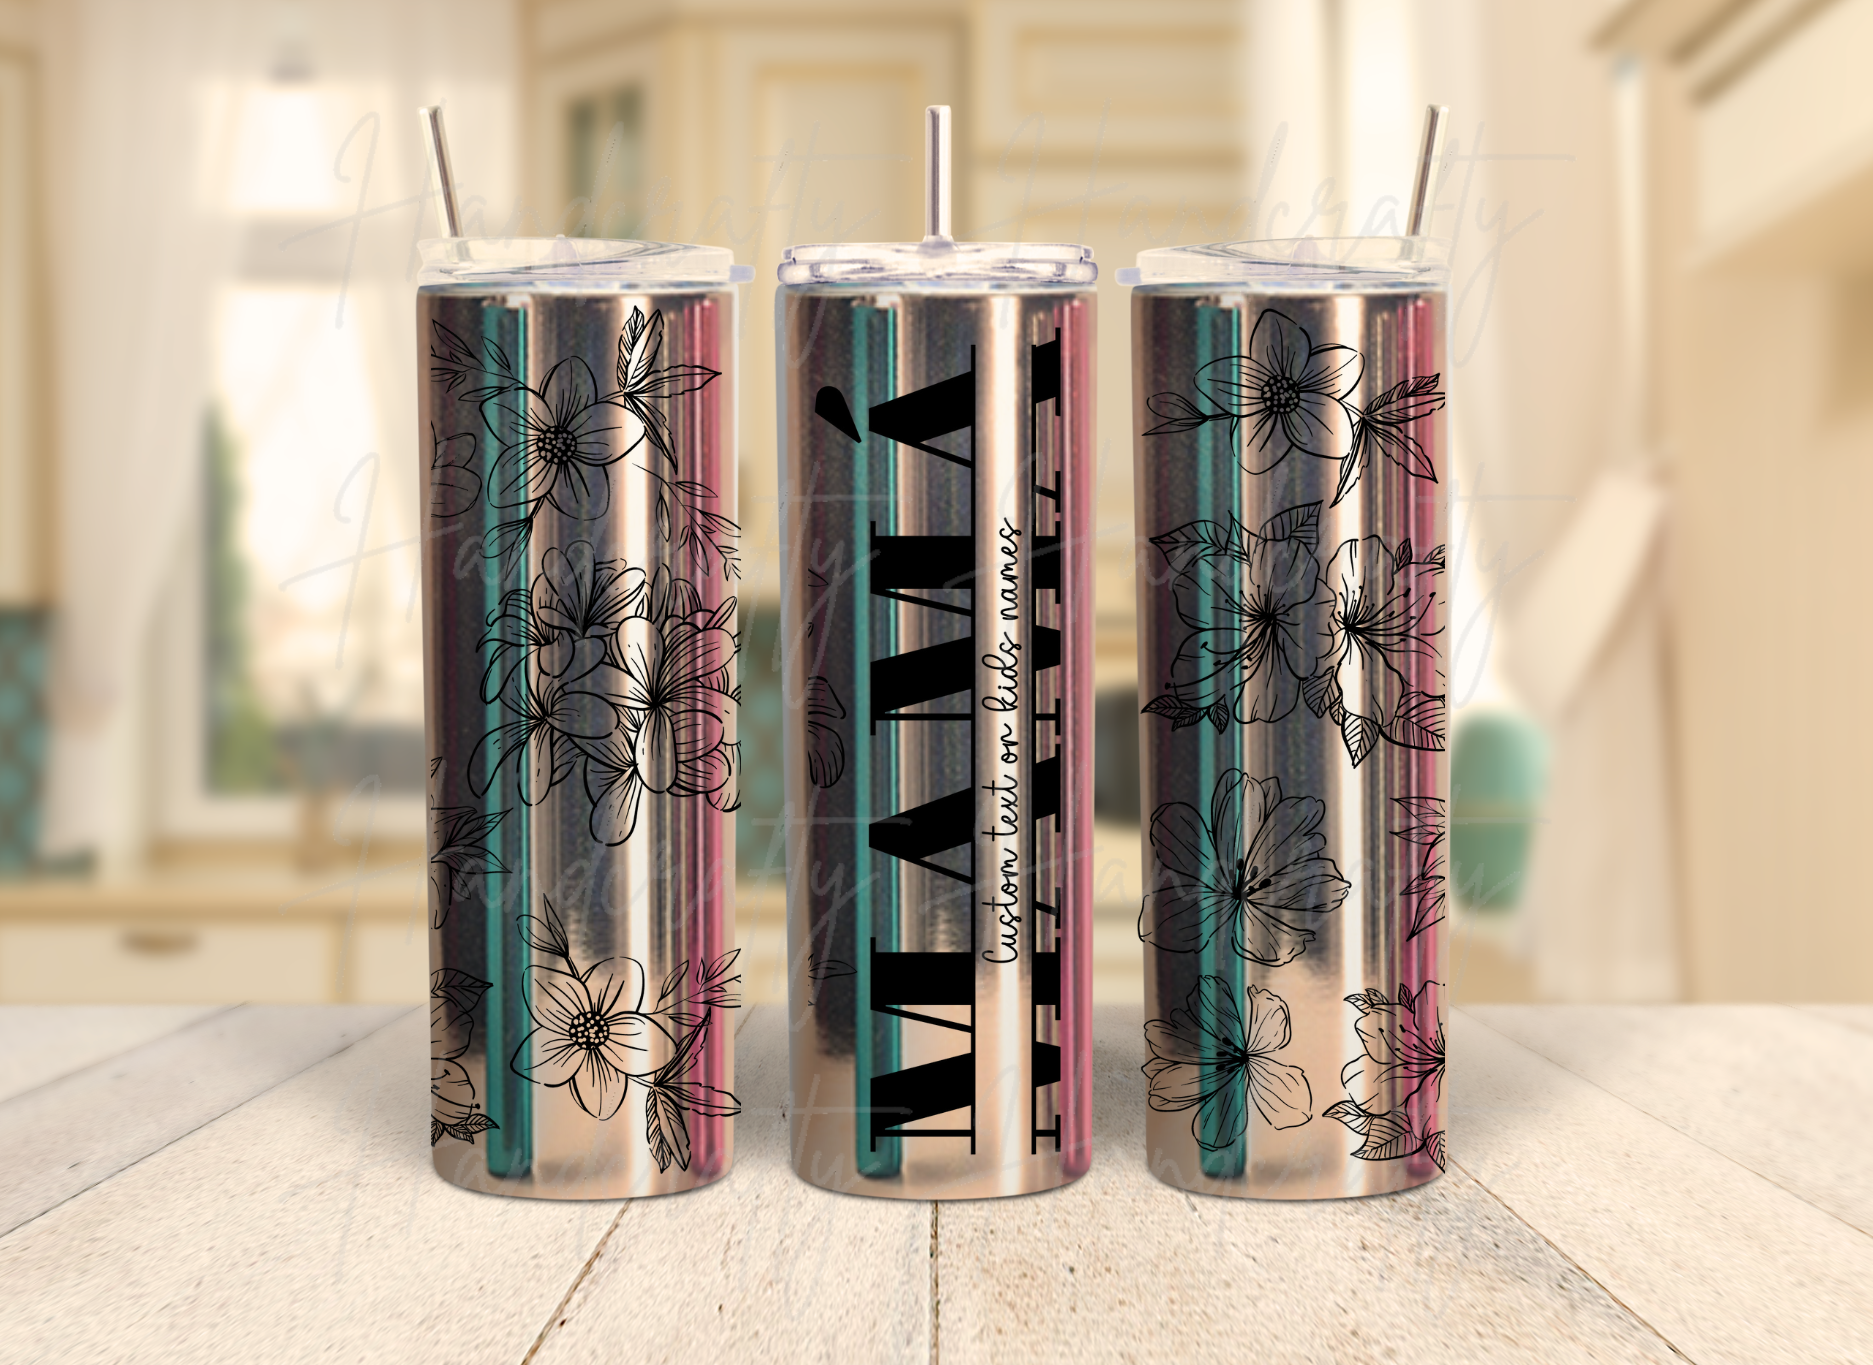 Mom insulated tumbler, Mother's Day tumbler, Gift for mom tumbler, Mom coffee tumbler, Mom tea tumbler, Mom travel tumbler, Personalized mom tumbler, Best mom tumbler, Mom life tumbler, Mom fuel tumbler, Mommy juice tumbler, Stainless steel mom tumbler, Mom water tumbler, Custom mom tumbler, Cute mom tumbler, mom coffee cup, mom tumbler cup, dia de la madre